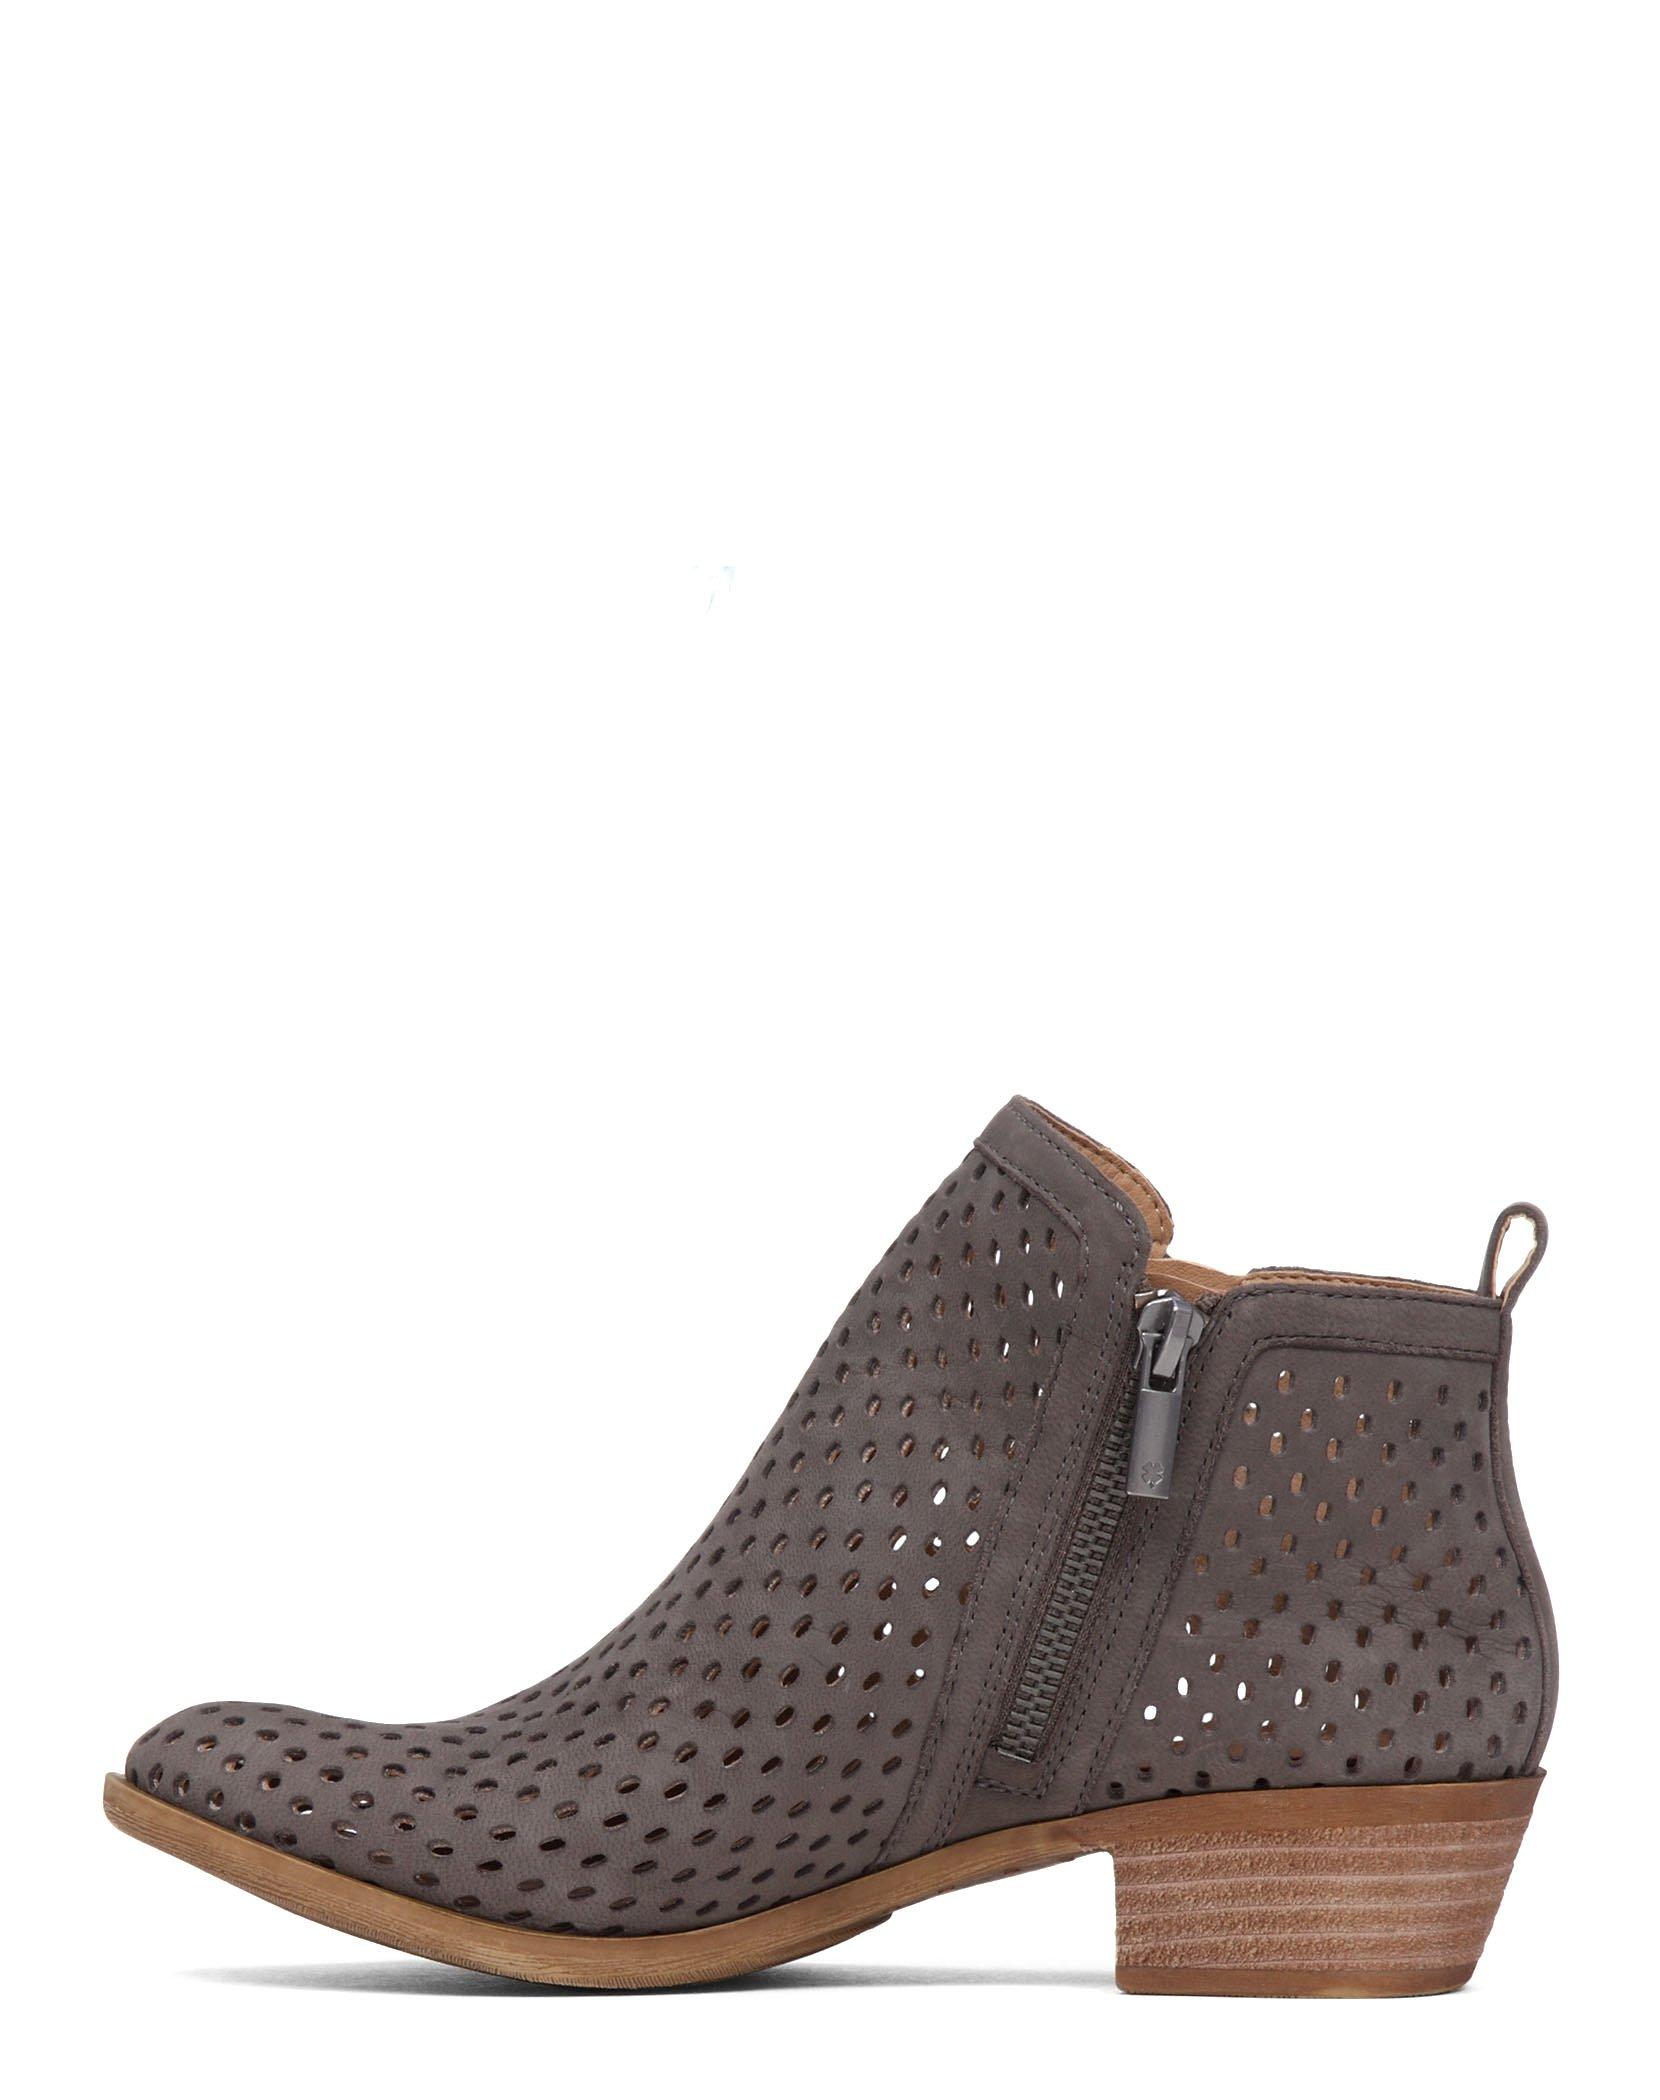 Basel Bootie Lucky Brand